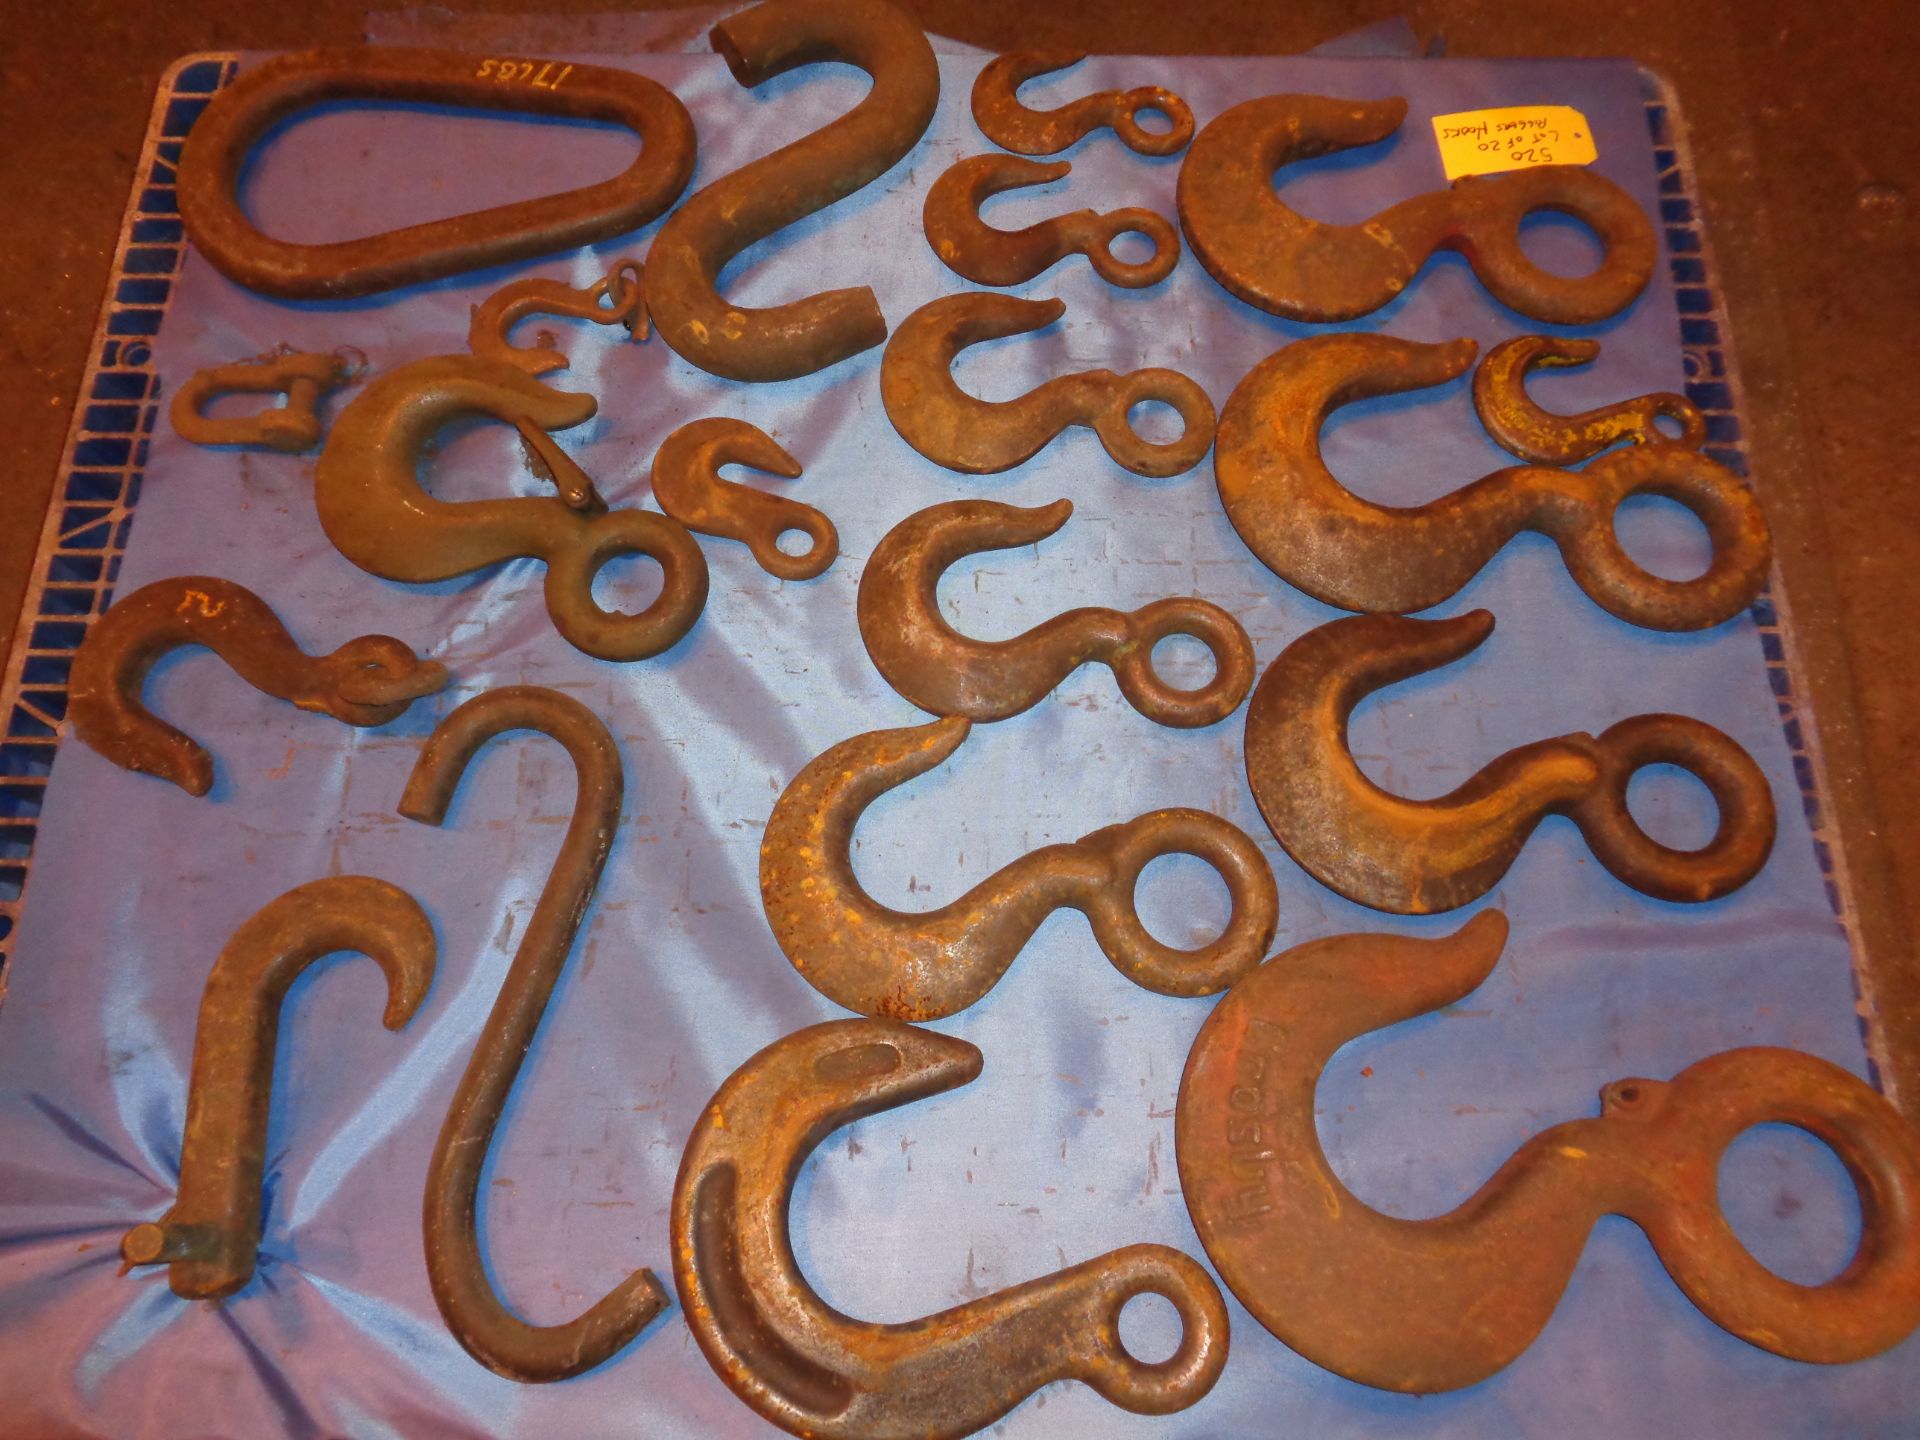 Lot of 20 Riggers Hooks (520) - Image 7 of 10